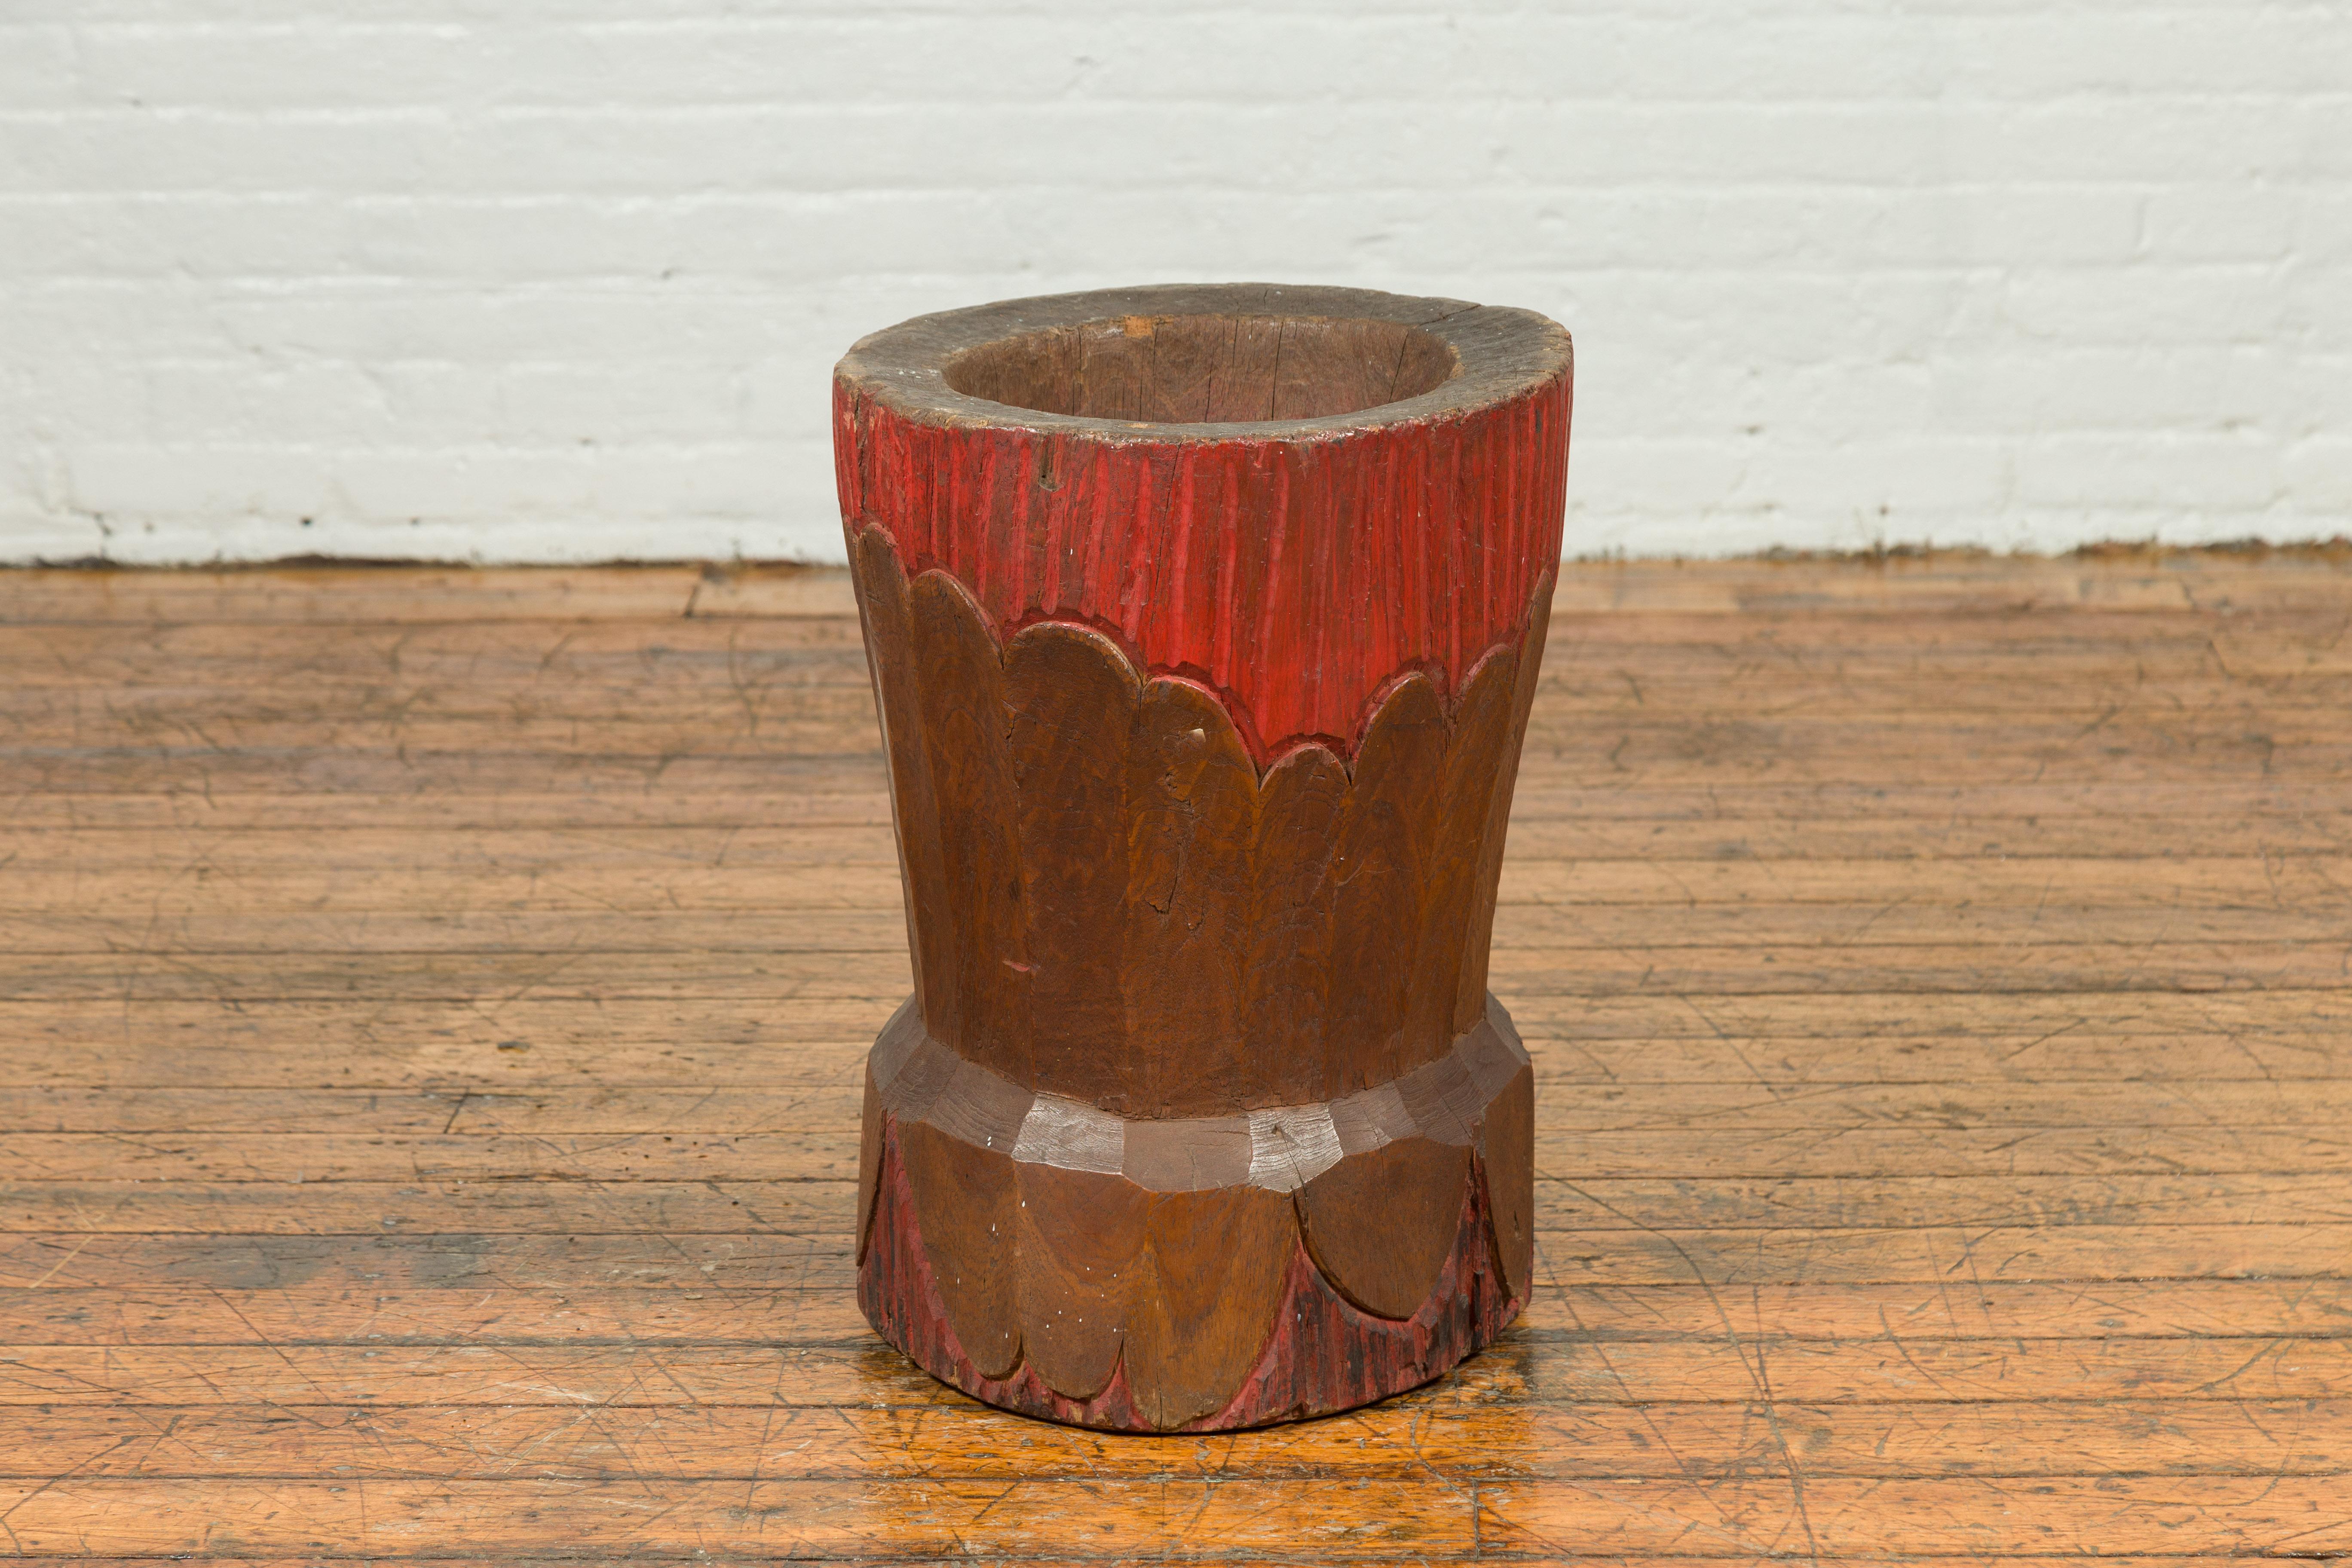 An antique Japanese wooden planter with floral design and red patina. Crafted in Japan, this wooden planter charms us with its rustic appearance and contrasting colors. Showcasing a design resembling flower petals, this Japanese planter will bring a